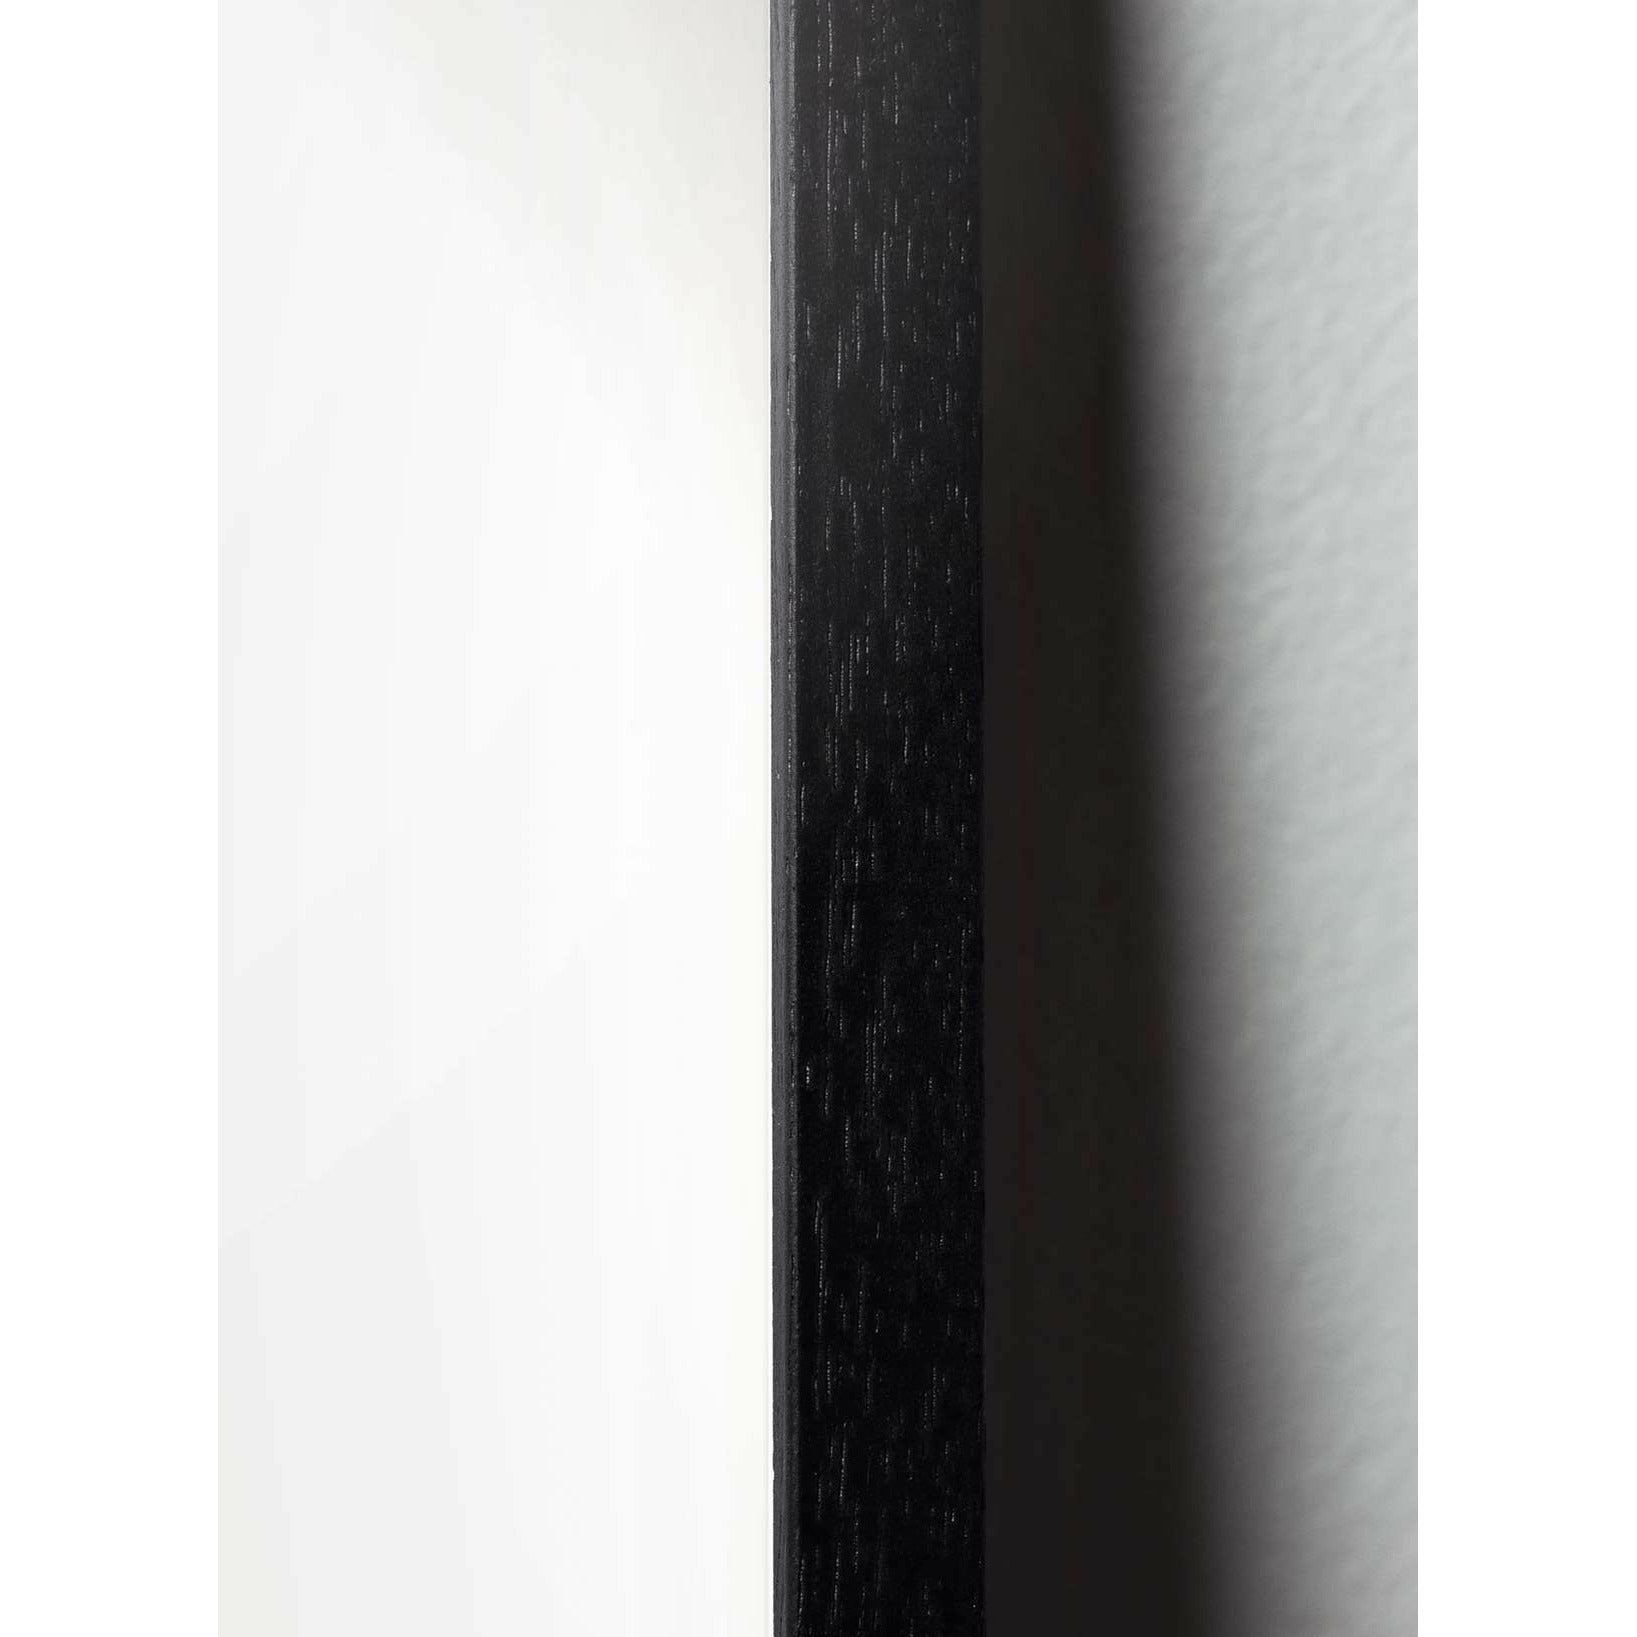 Brainchild Swan Parade Poster, Frame Made Of Black Lacquered Wood, 50 X70 Cm